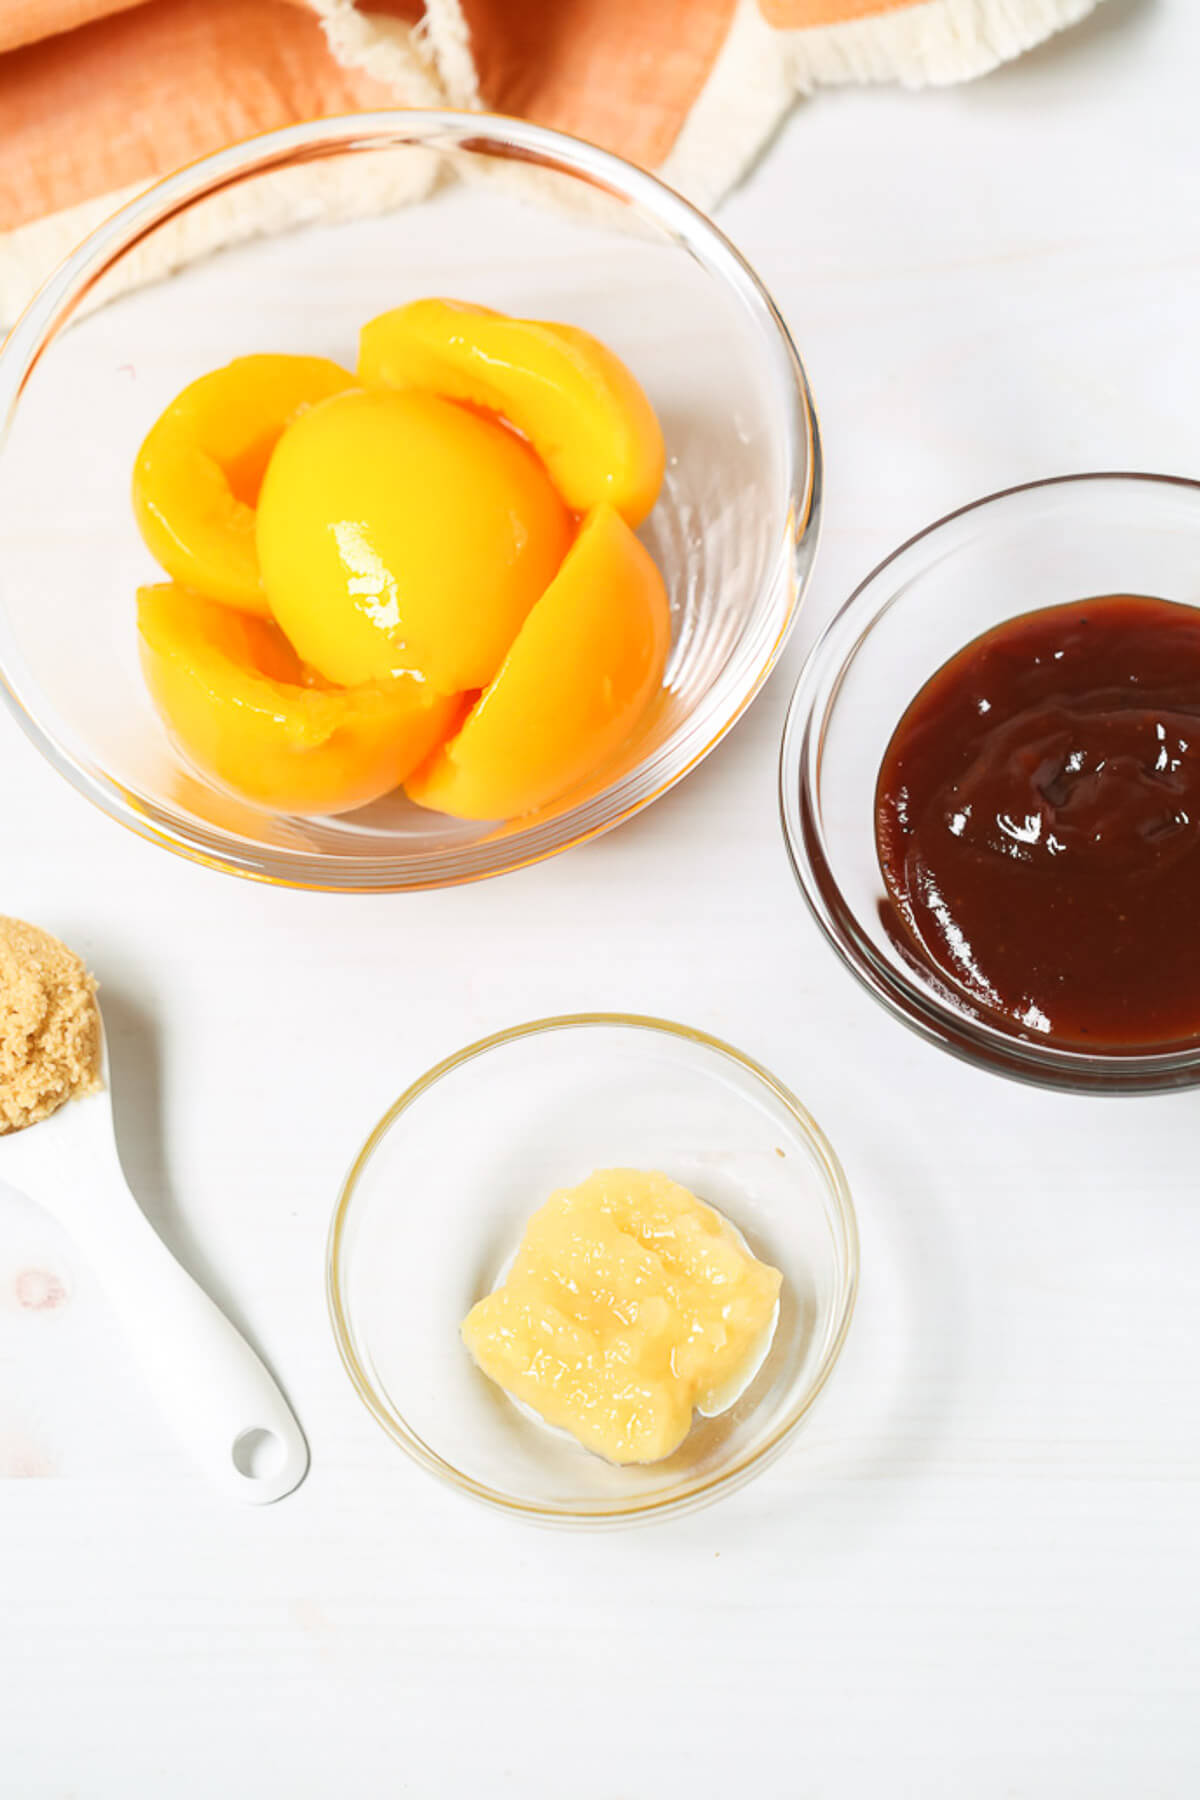 Peaches, barbeque sauce and seasonings.